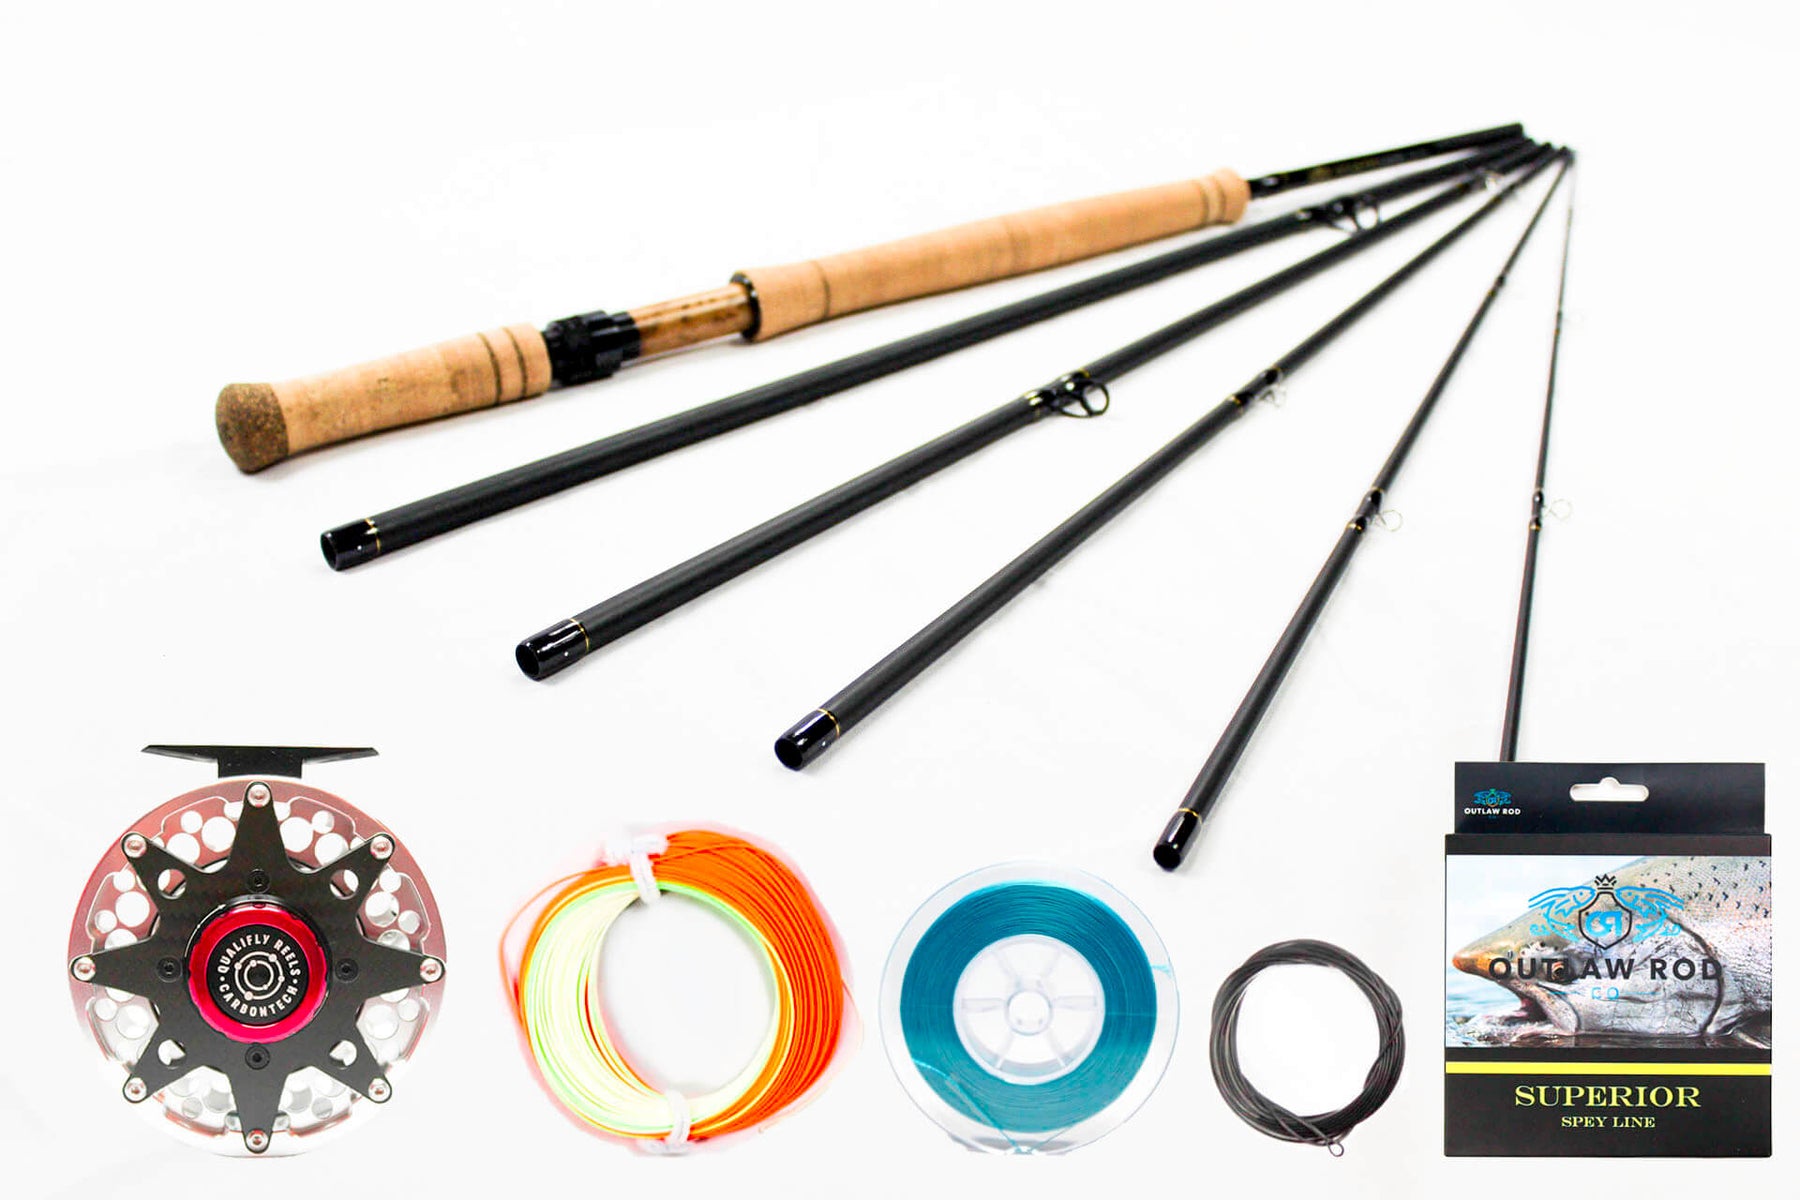 7wt 13ft M-Series (Spey Rod) and Oversized 9-10wt Qualifly Carbontech –  Outlaw Rod Co.